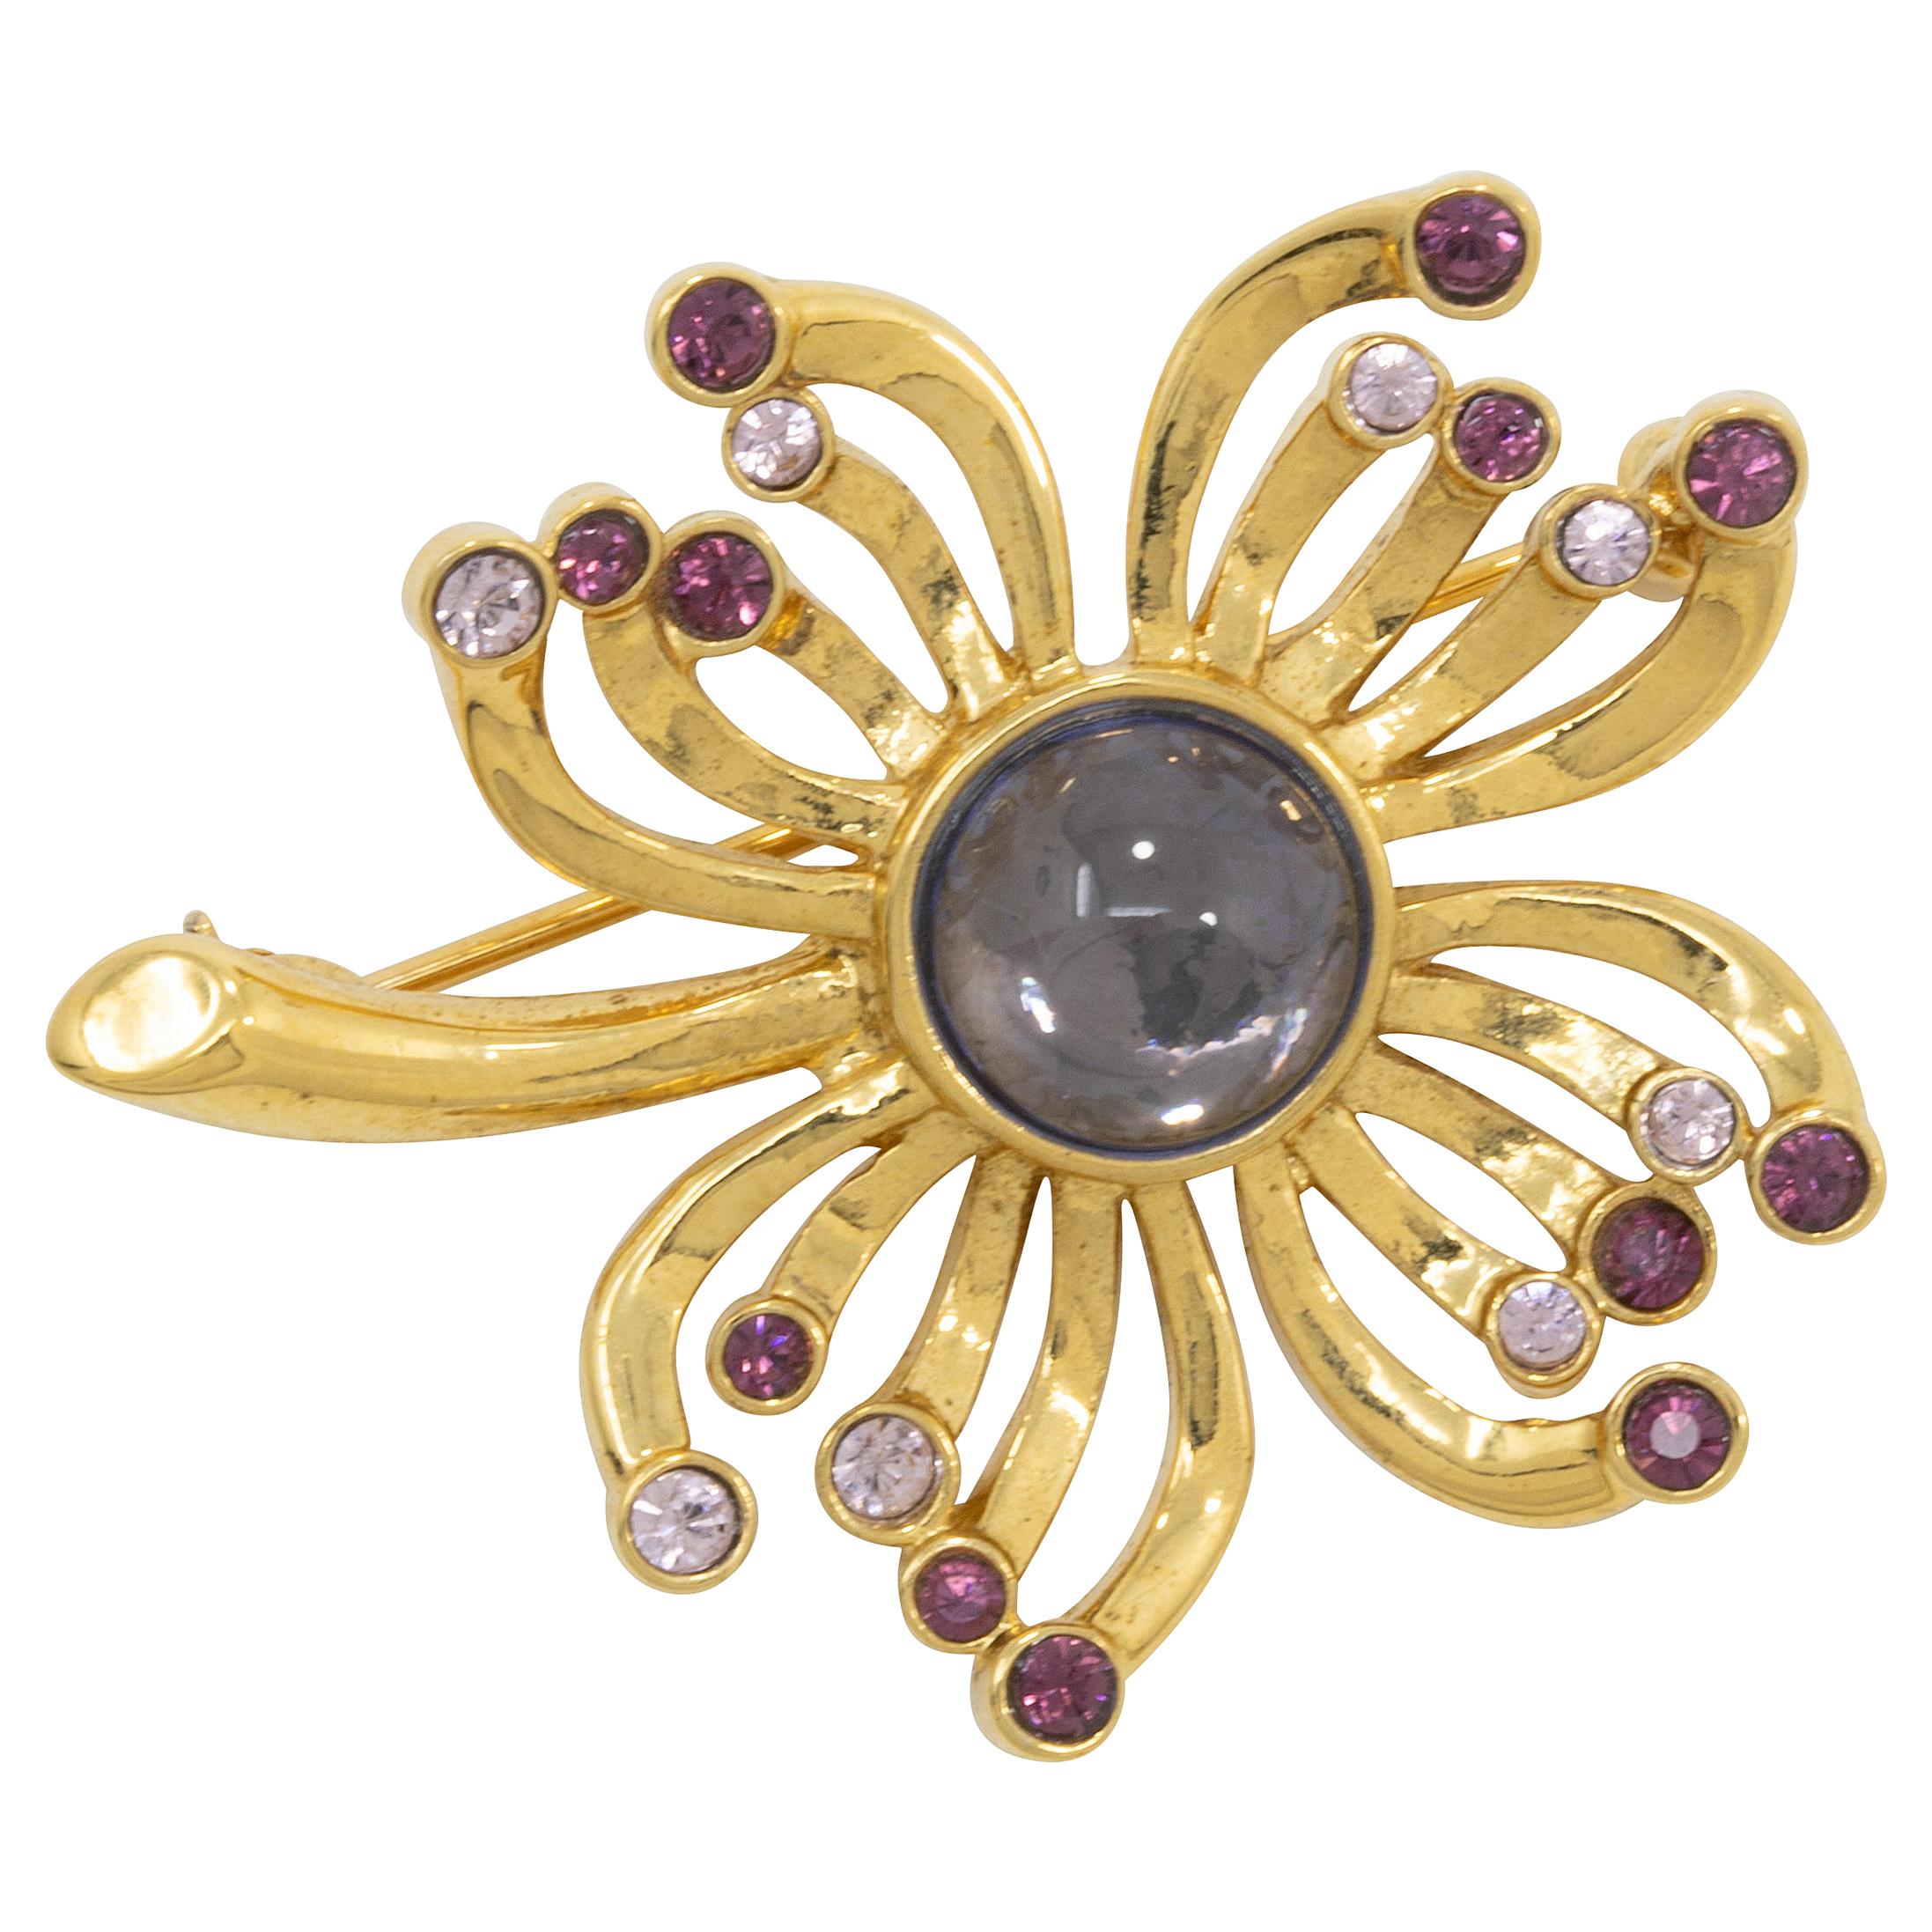 Trifari Gold Flower Pin Brooch with Amethyst Crystals and Cabochon